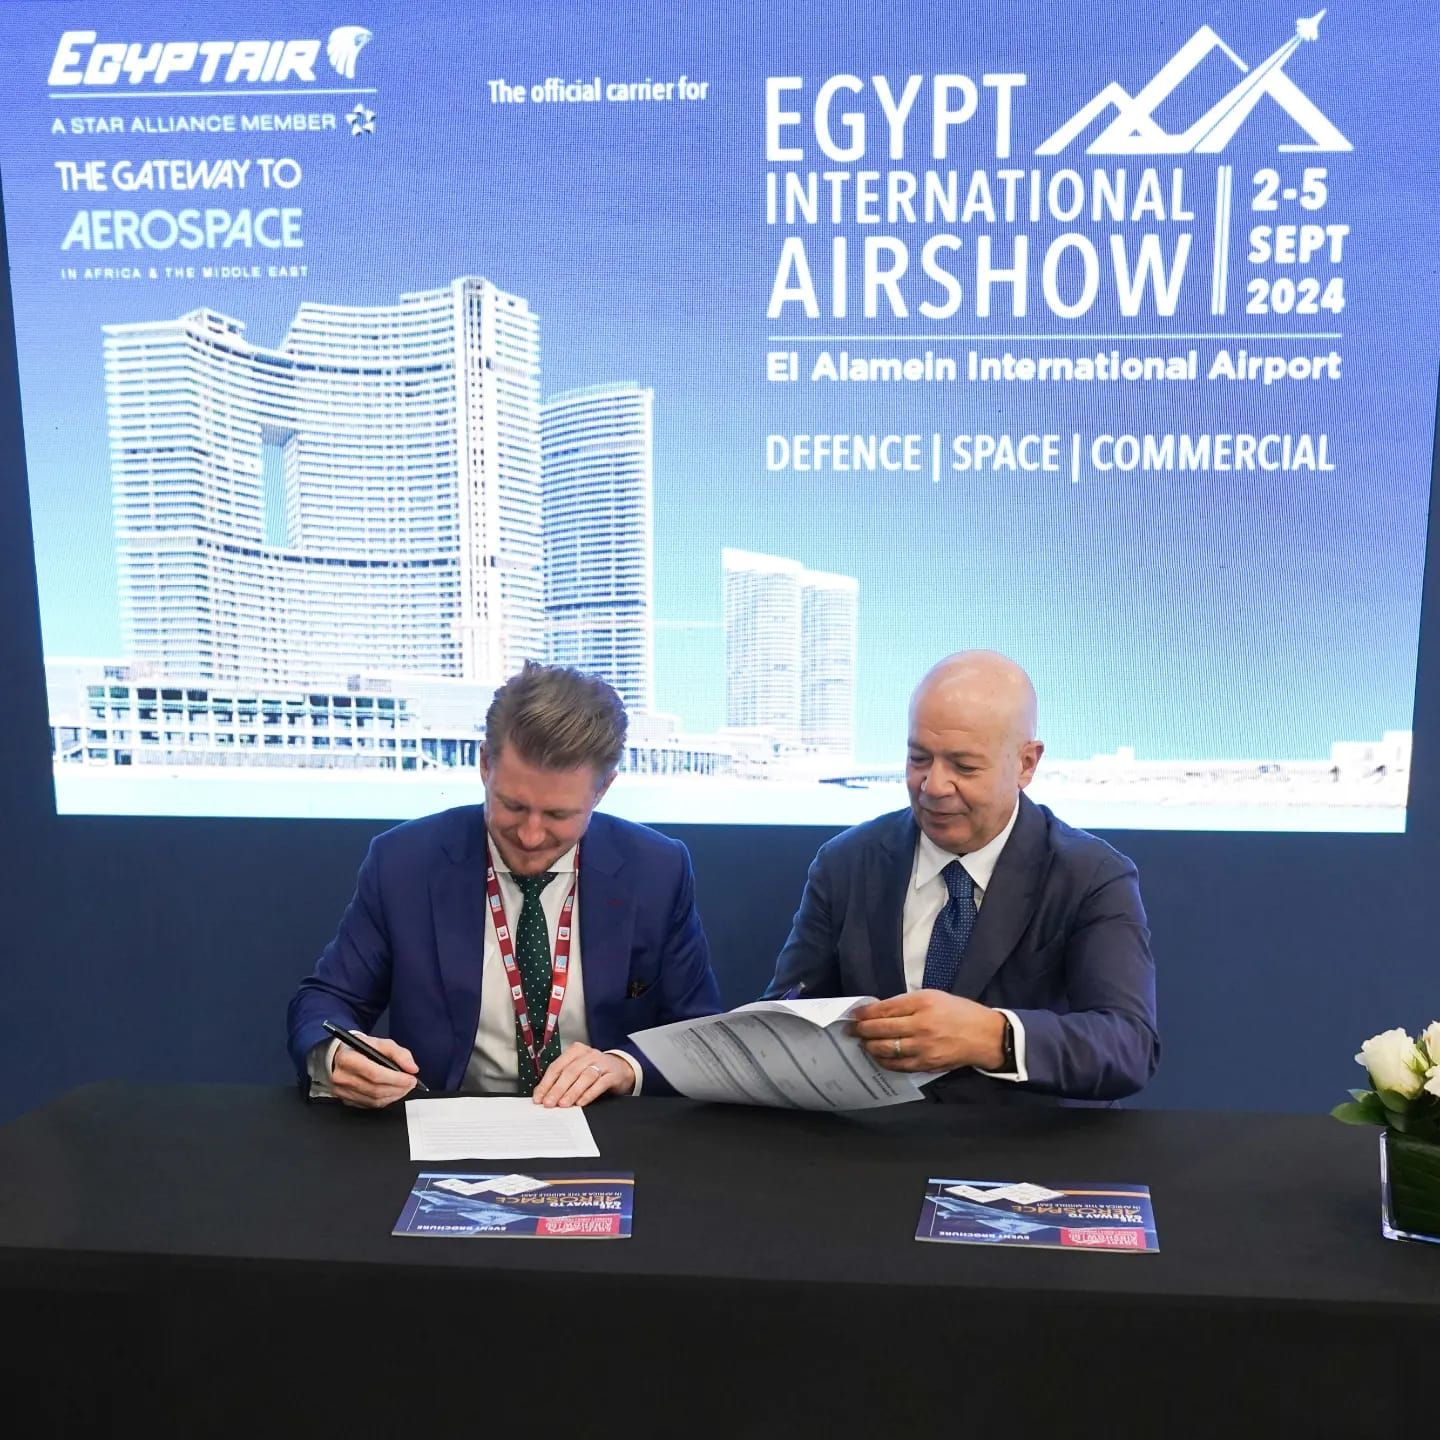 EgyptAir and Egypt International Airshow join forces